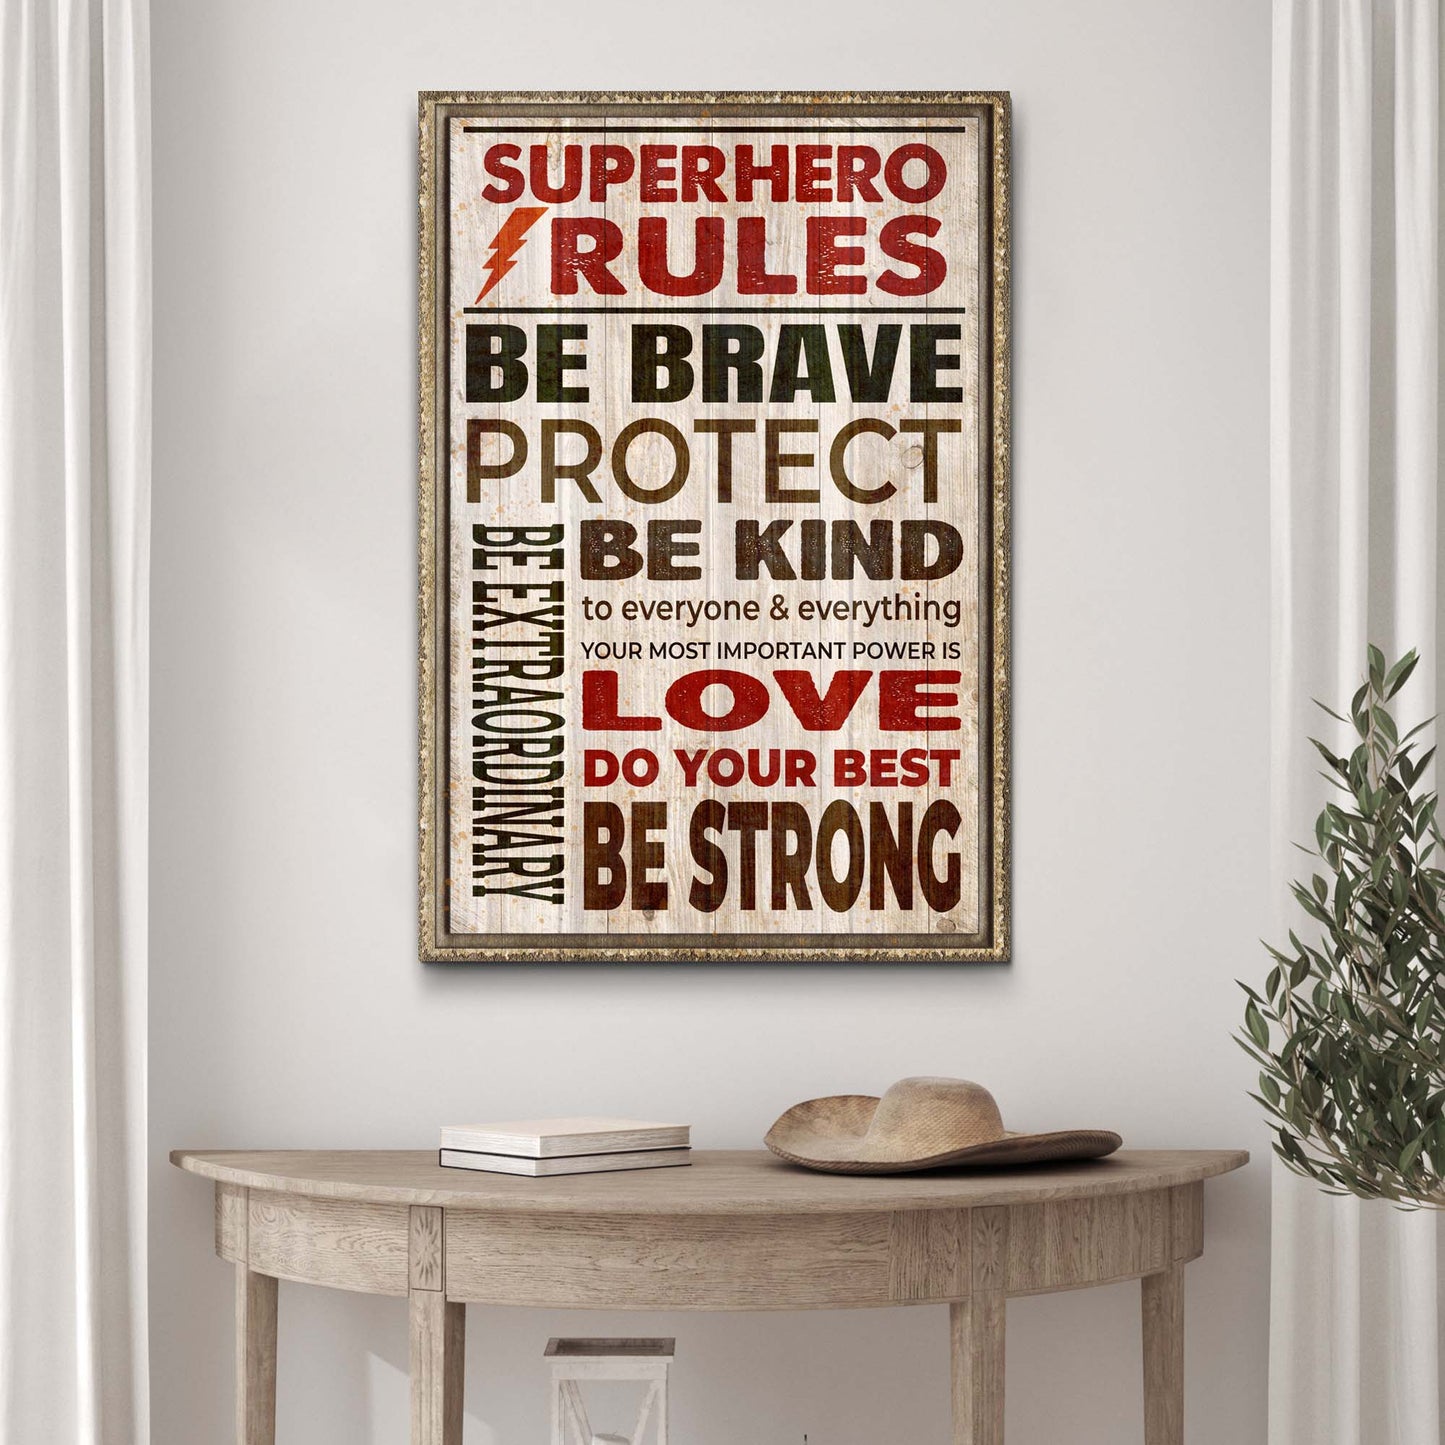 Your Most Important Power Is Love Superhero Rules Sign Style 2 - Image by Tailored Canvases